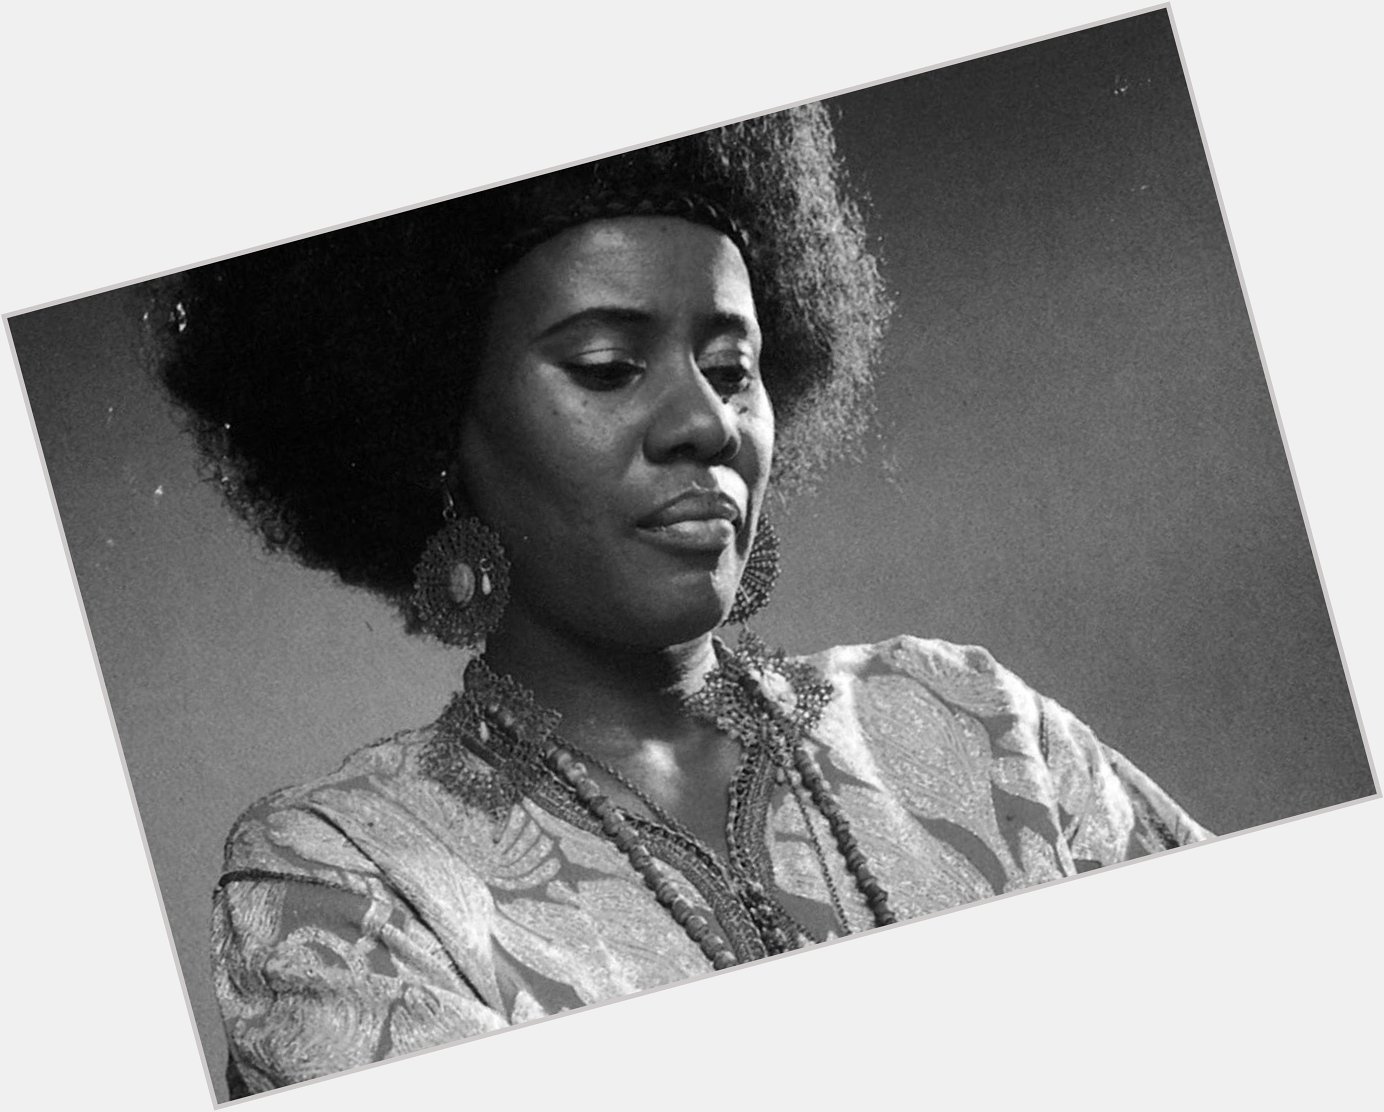 Happy Birthday Alice Coltrane in the cosmos. One of the greatest artists of the 20th C. 